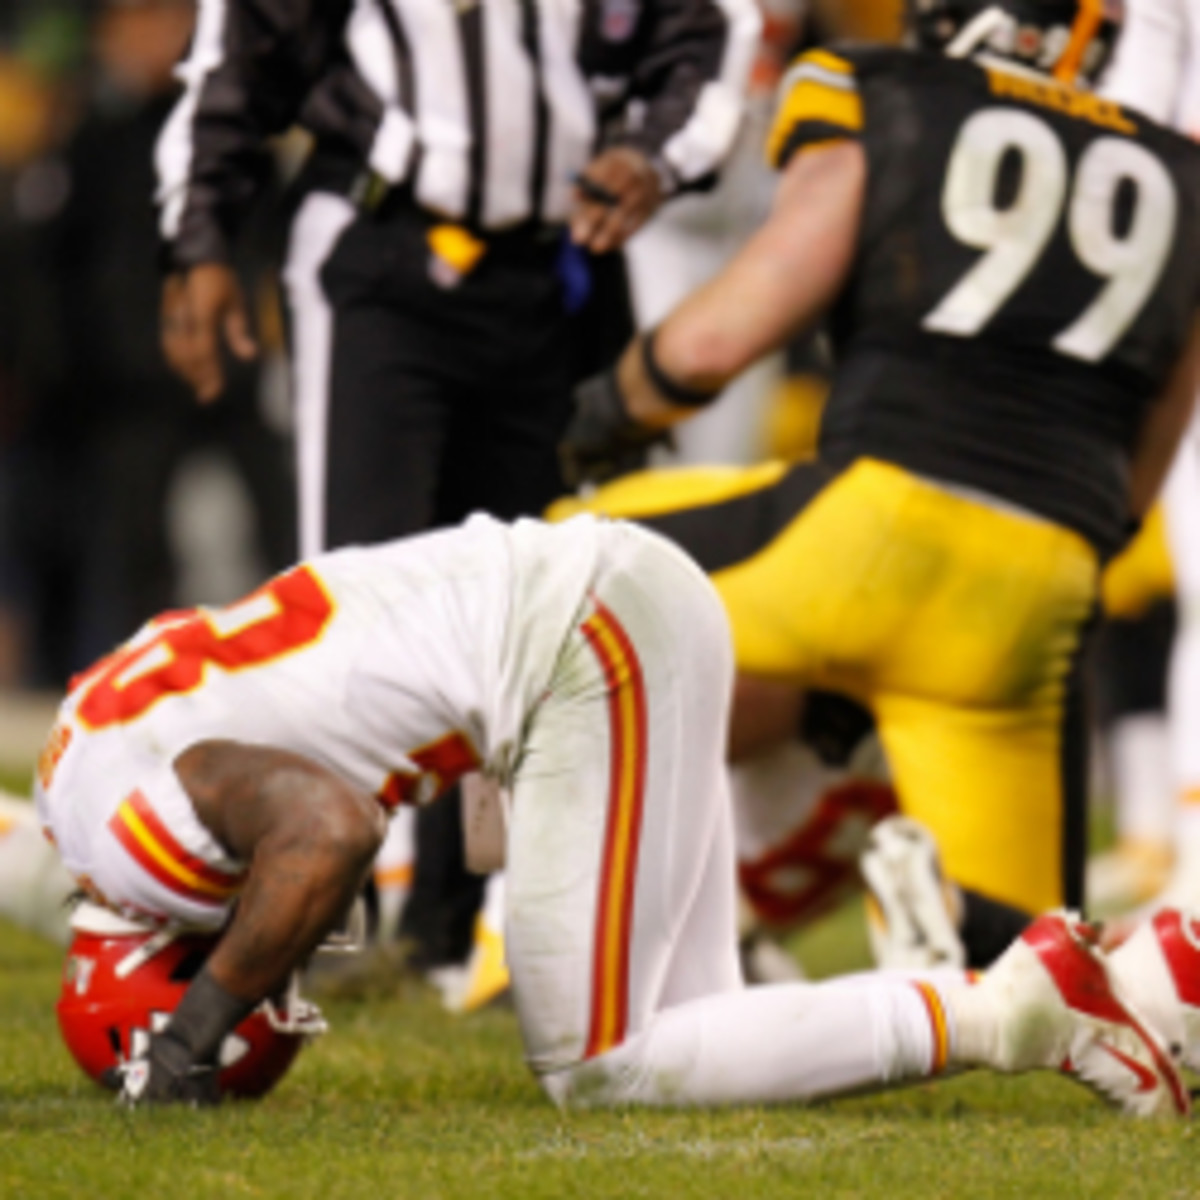 Chiefs wide receiver Dwayne Bowe will be out for the rest of the season. (Gregory Shamus/Getty Images)